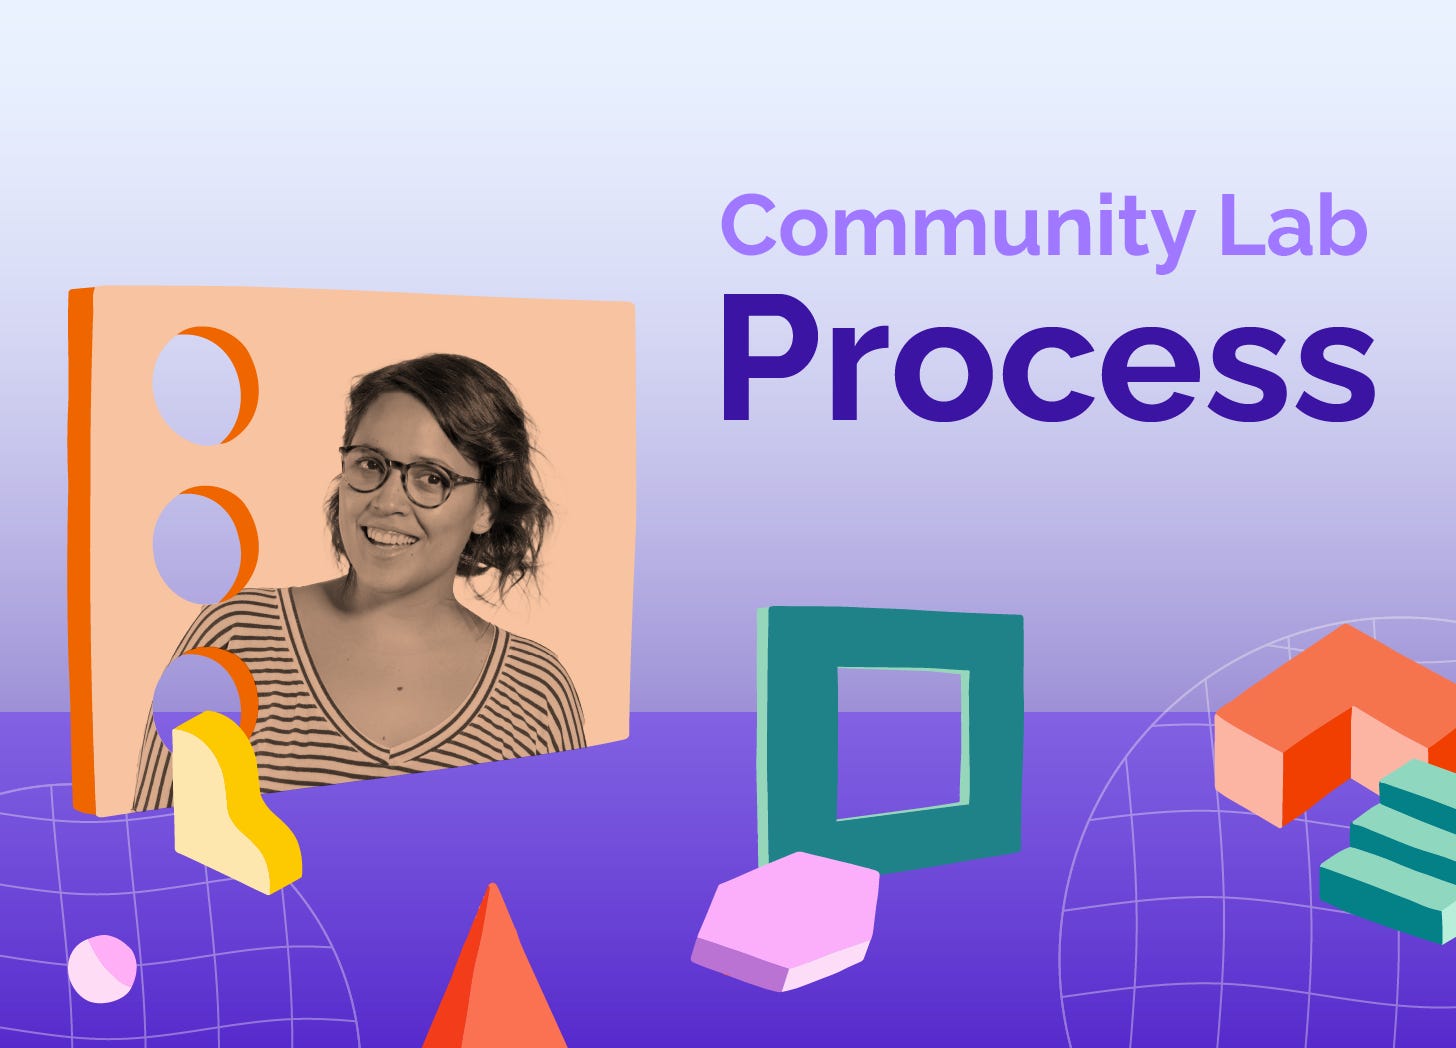 An image of colorful shapes and the titles “Community Lab” and “Process”. A black and white photo of a woman with medium length hair in a striped shirt is on an orange shape.